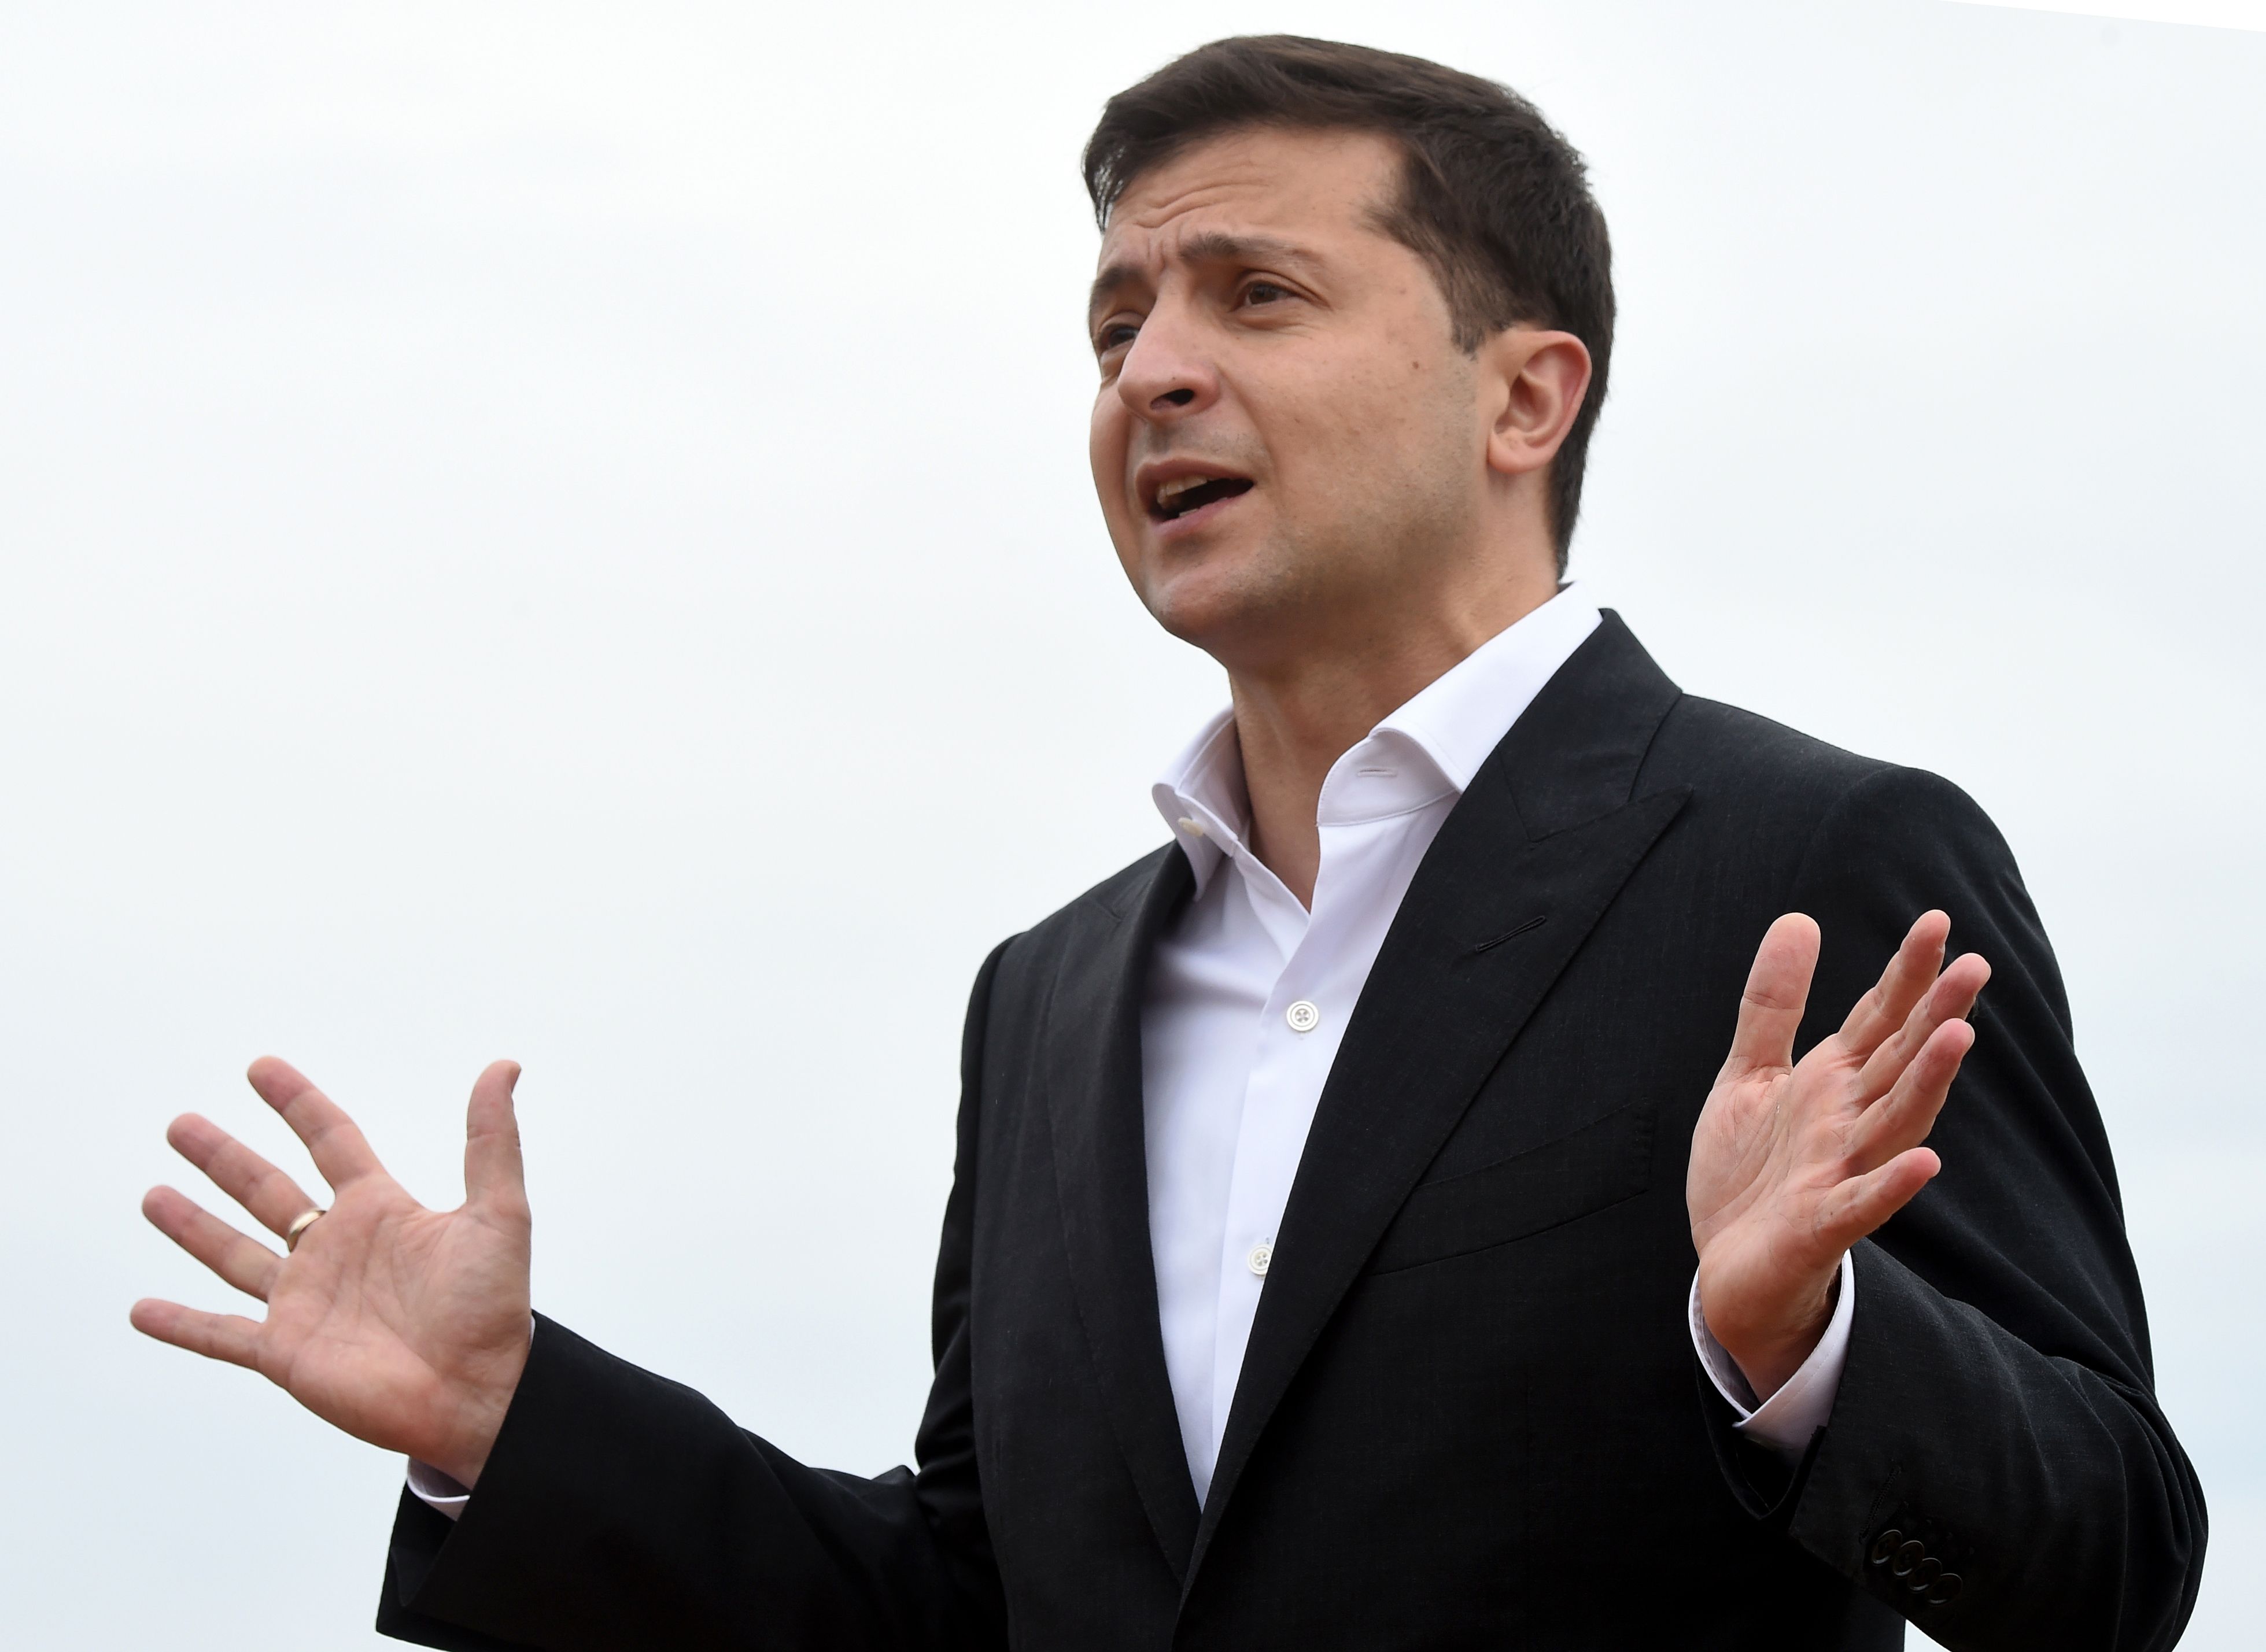 Ukrainian President Volodymyr Zelensky gestures as he speaks after tactical exercises at the National Guard training ground near Stare village on Sept. 30, 2019.